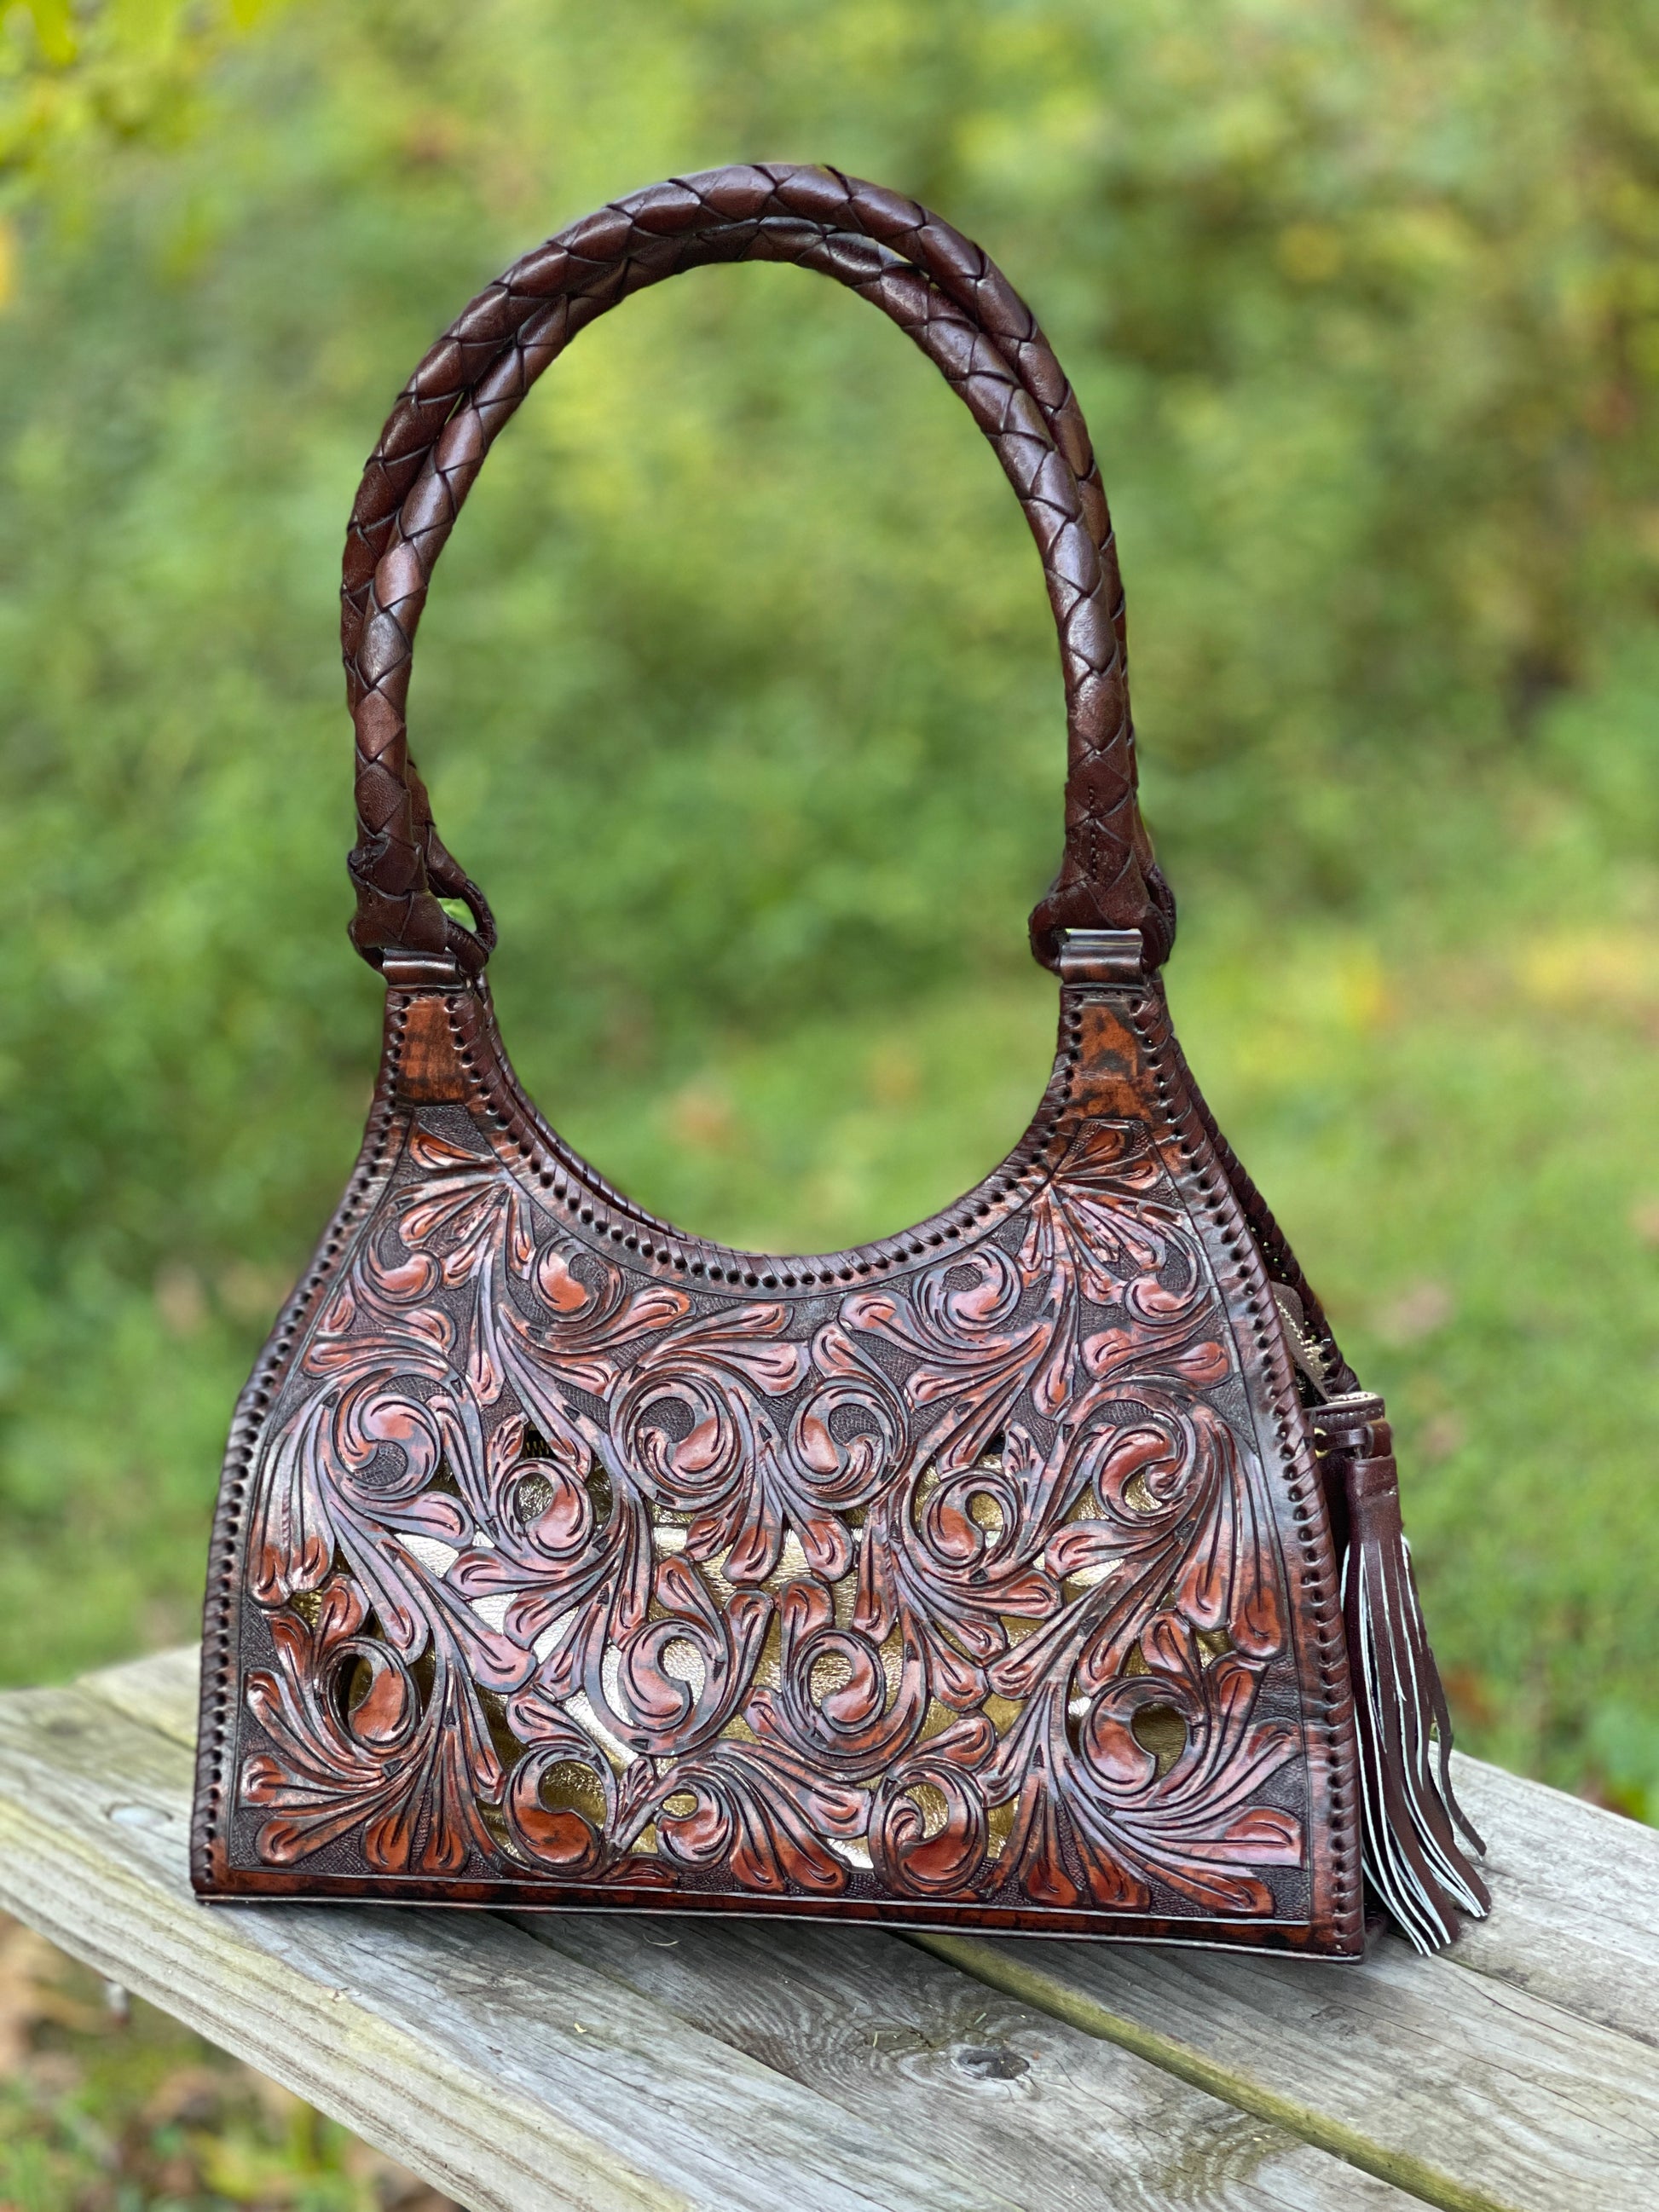 Hand Cut Out Tooling Leather Hobo Bag "LUNA" by ALLE - ALLE Handbags